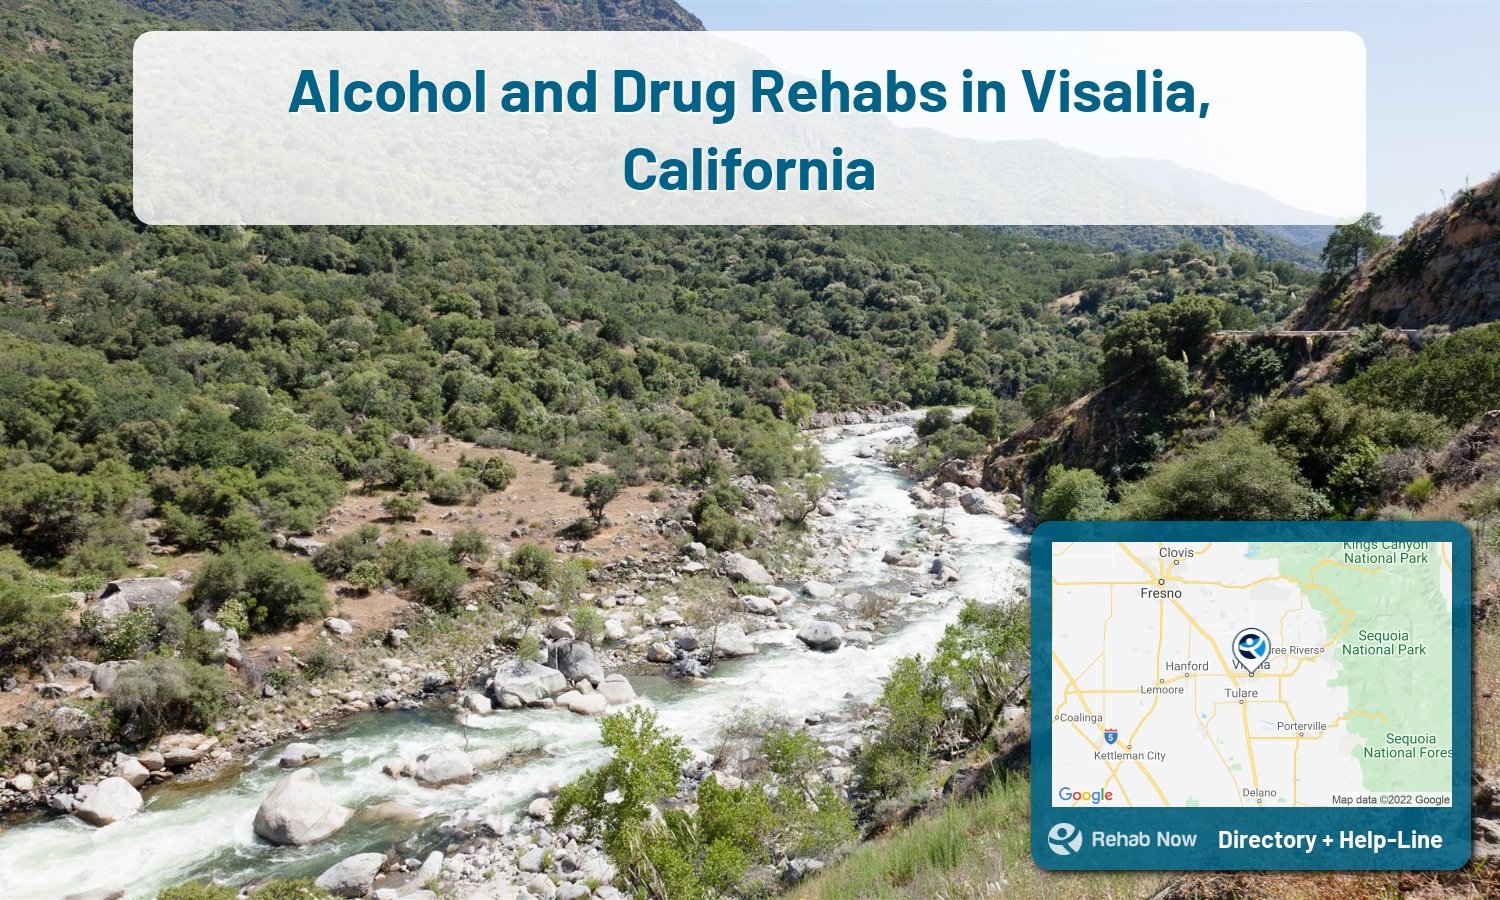 Ready to pick a rehab center in Visalia? Get off alcohol, opiates, and other drugs, by selecting top drug rehab centers in California